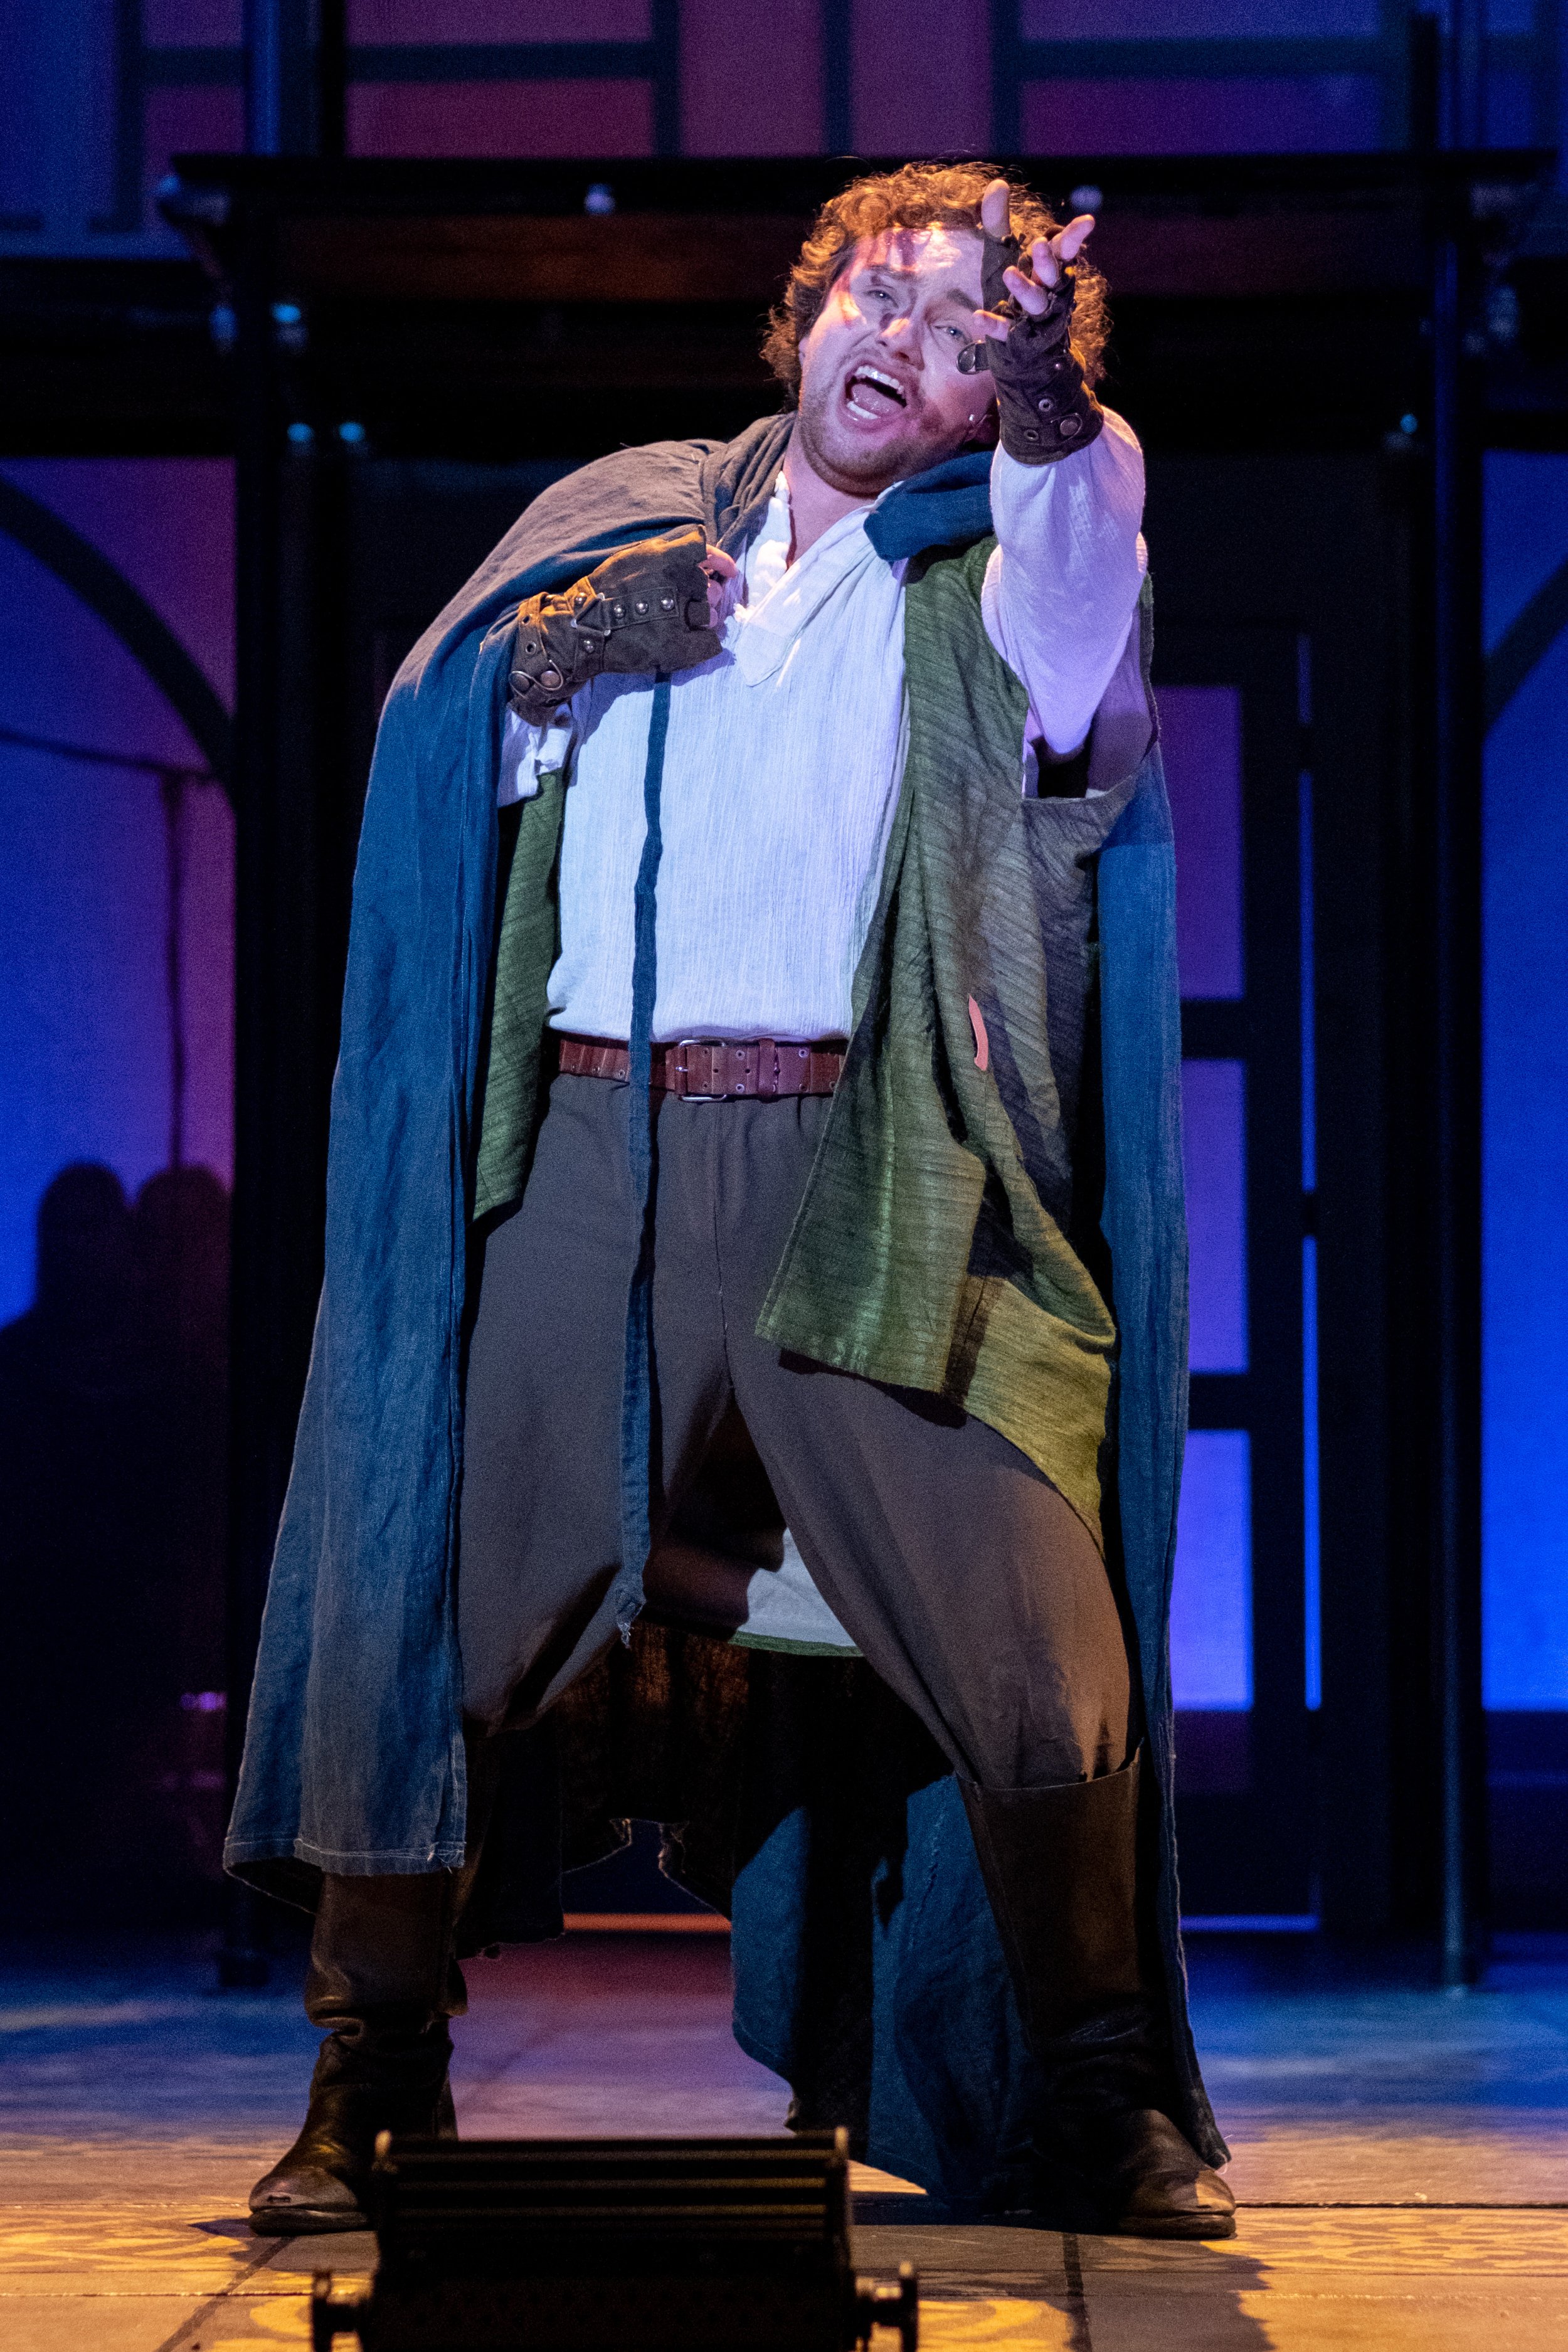  Elliott Moore as Quasimodo, the deformed bell-ringer of Notre Dame, in the musical production, The Hunchback of Notre Dame, during rehearsal on Thursday, March 30, 2023 at Santa Monica College Theare Arts and Music Departments Main Stage. (Akemi RIc